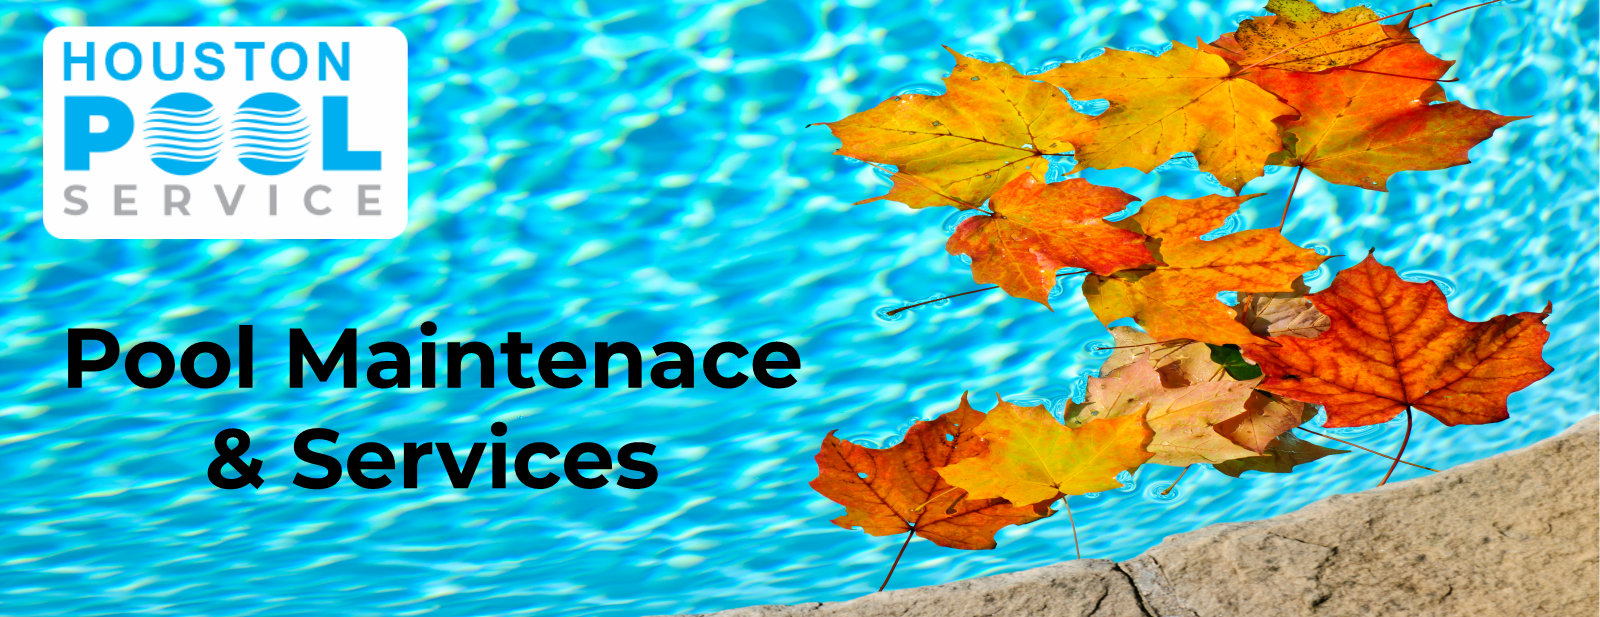 Pool Services and Maintenance